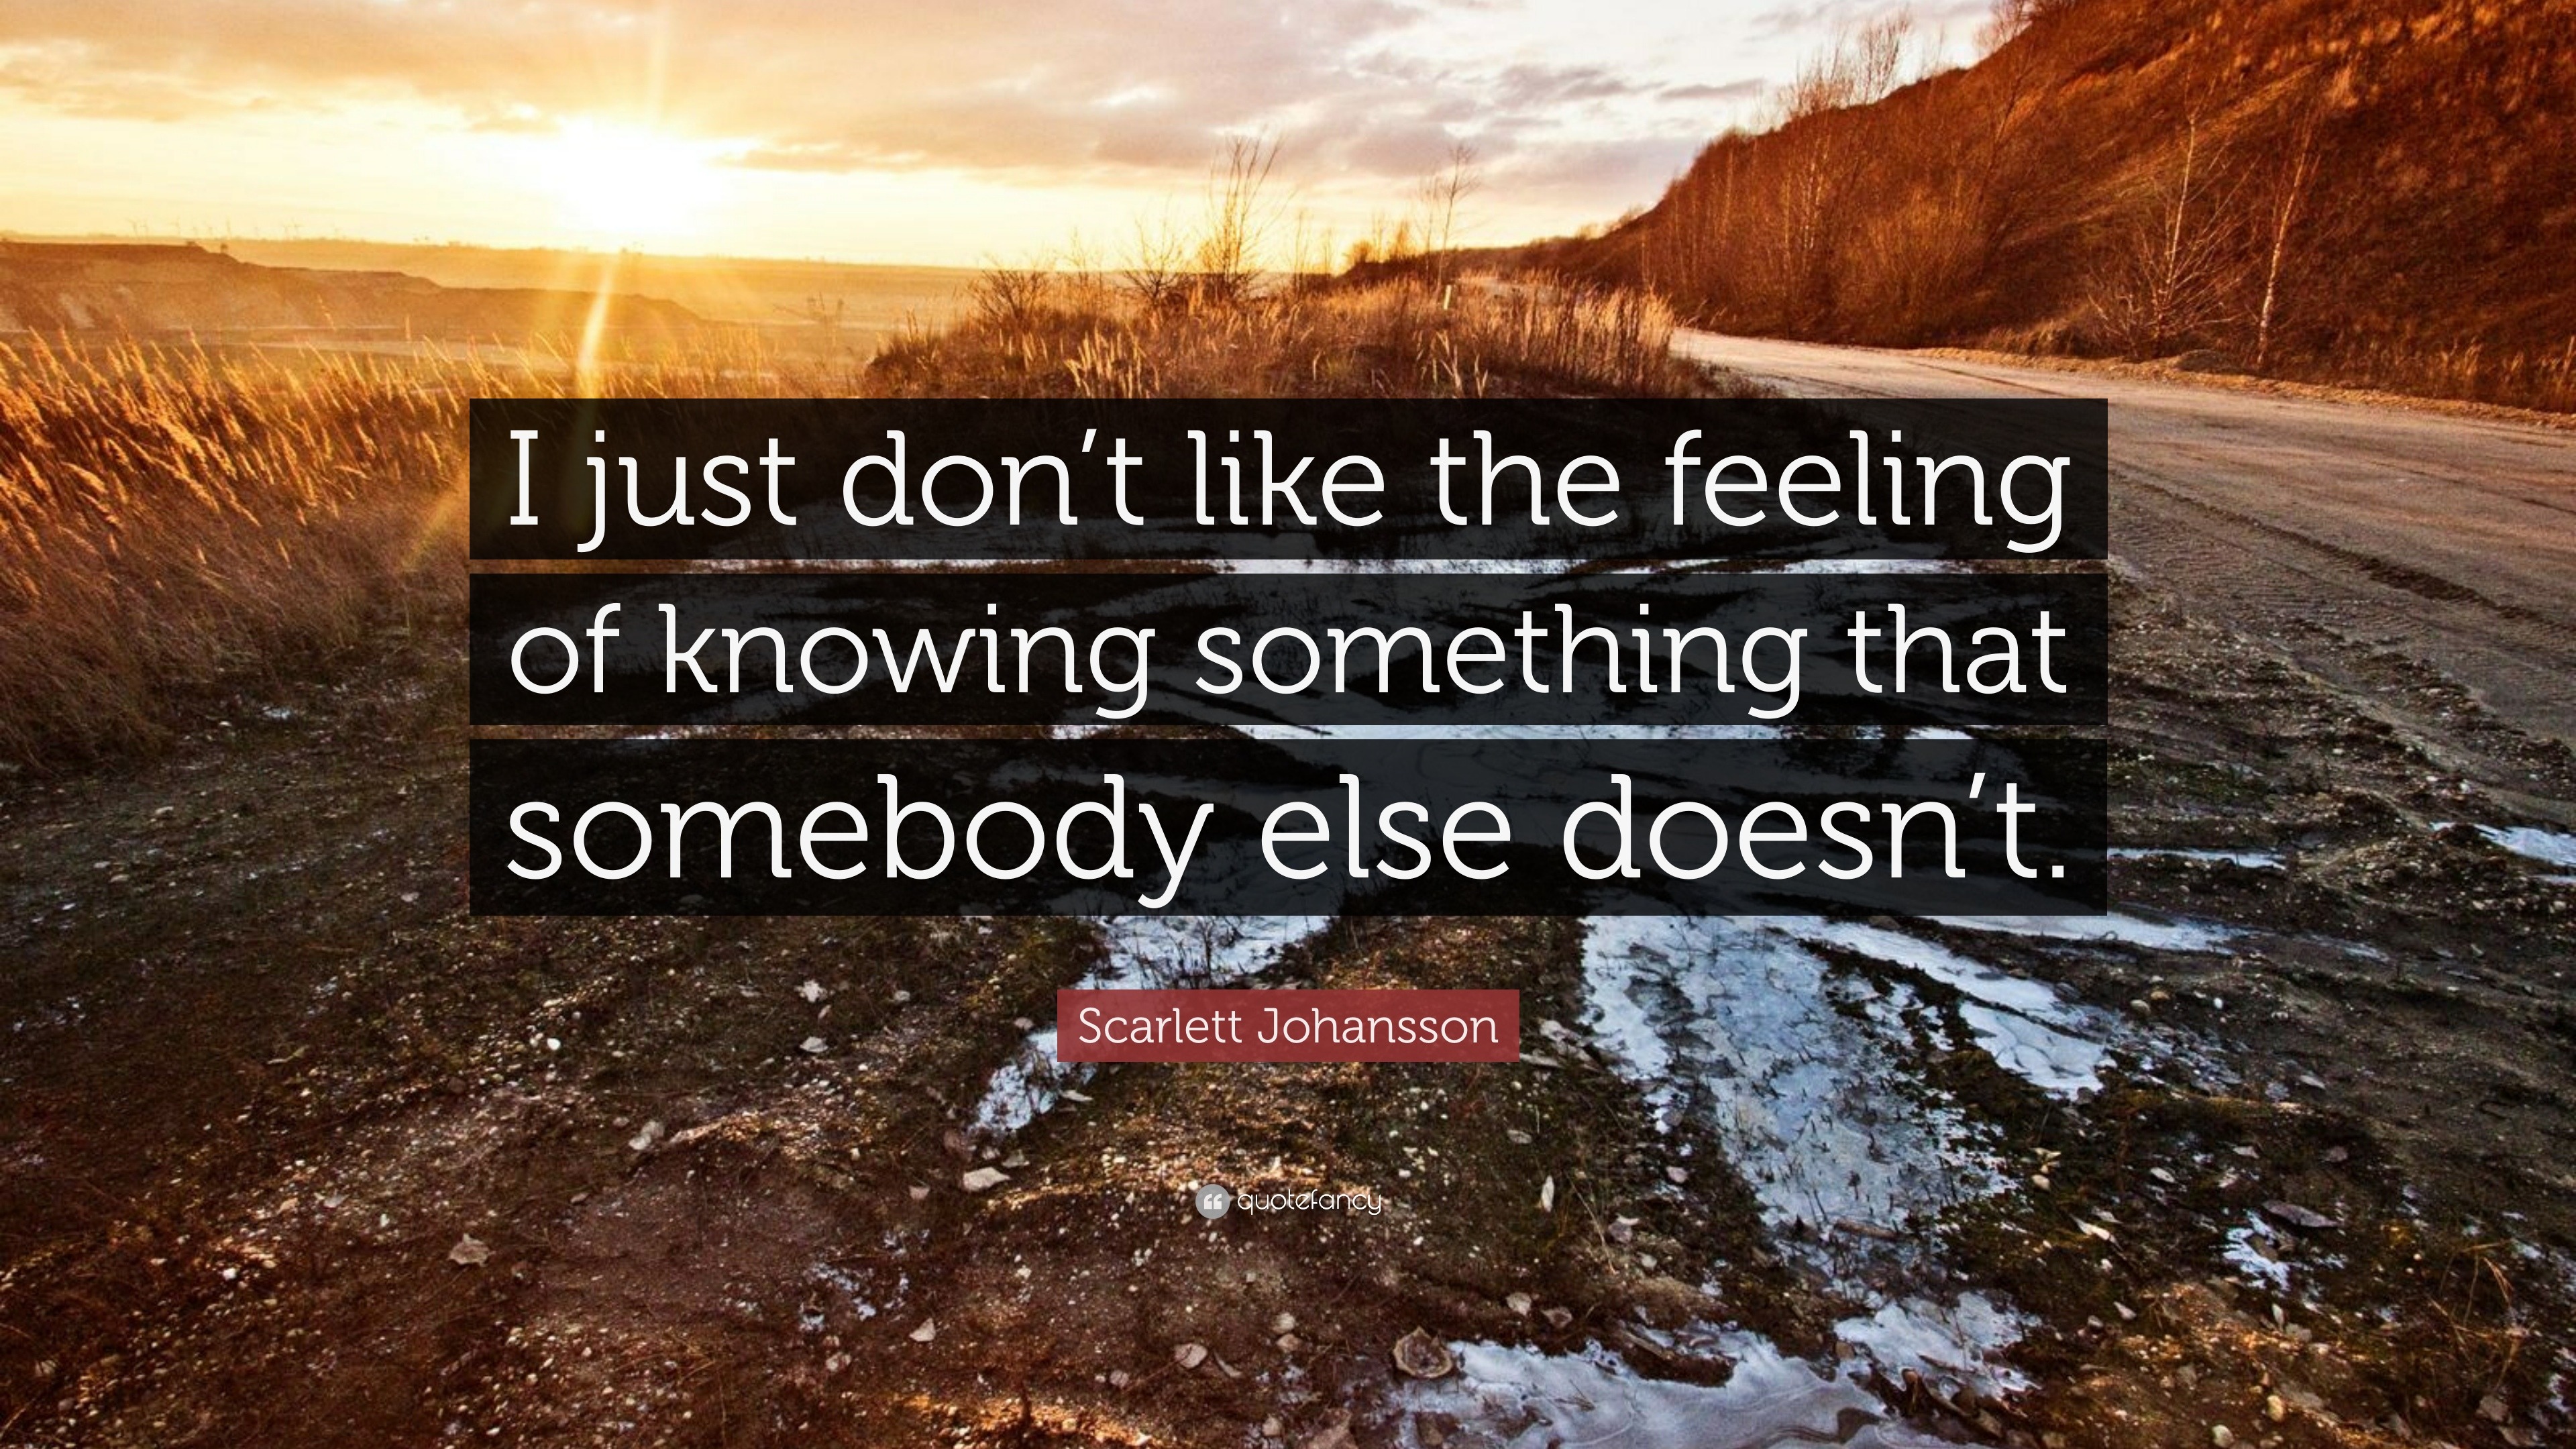 Scarlett Johansson Quote: “I just don’t like the feeling of knowing ...